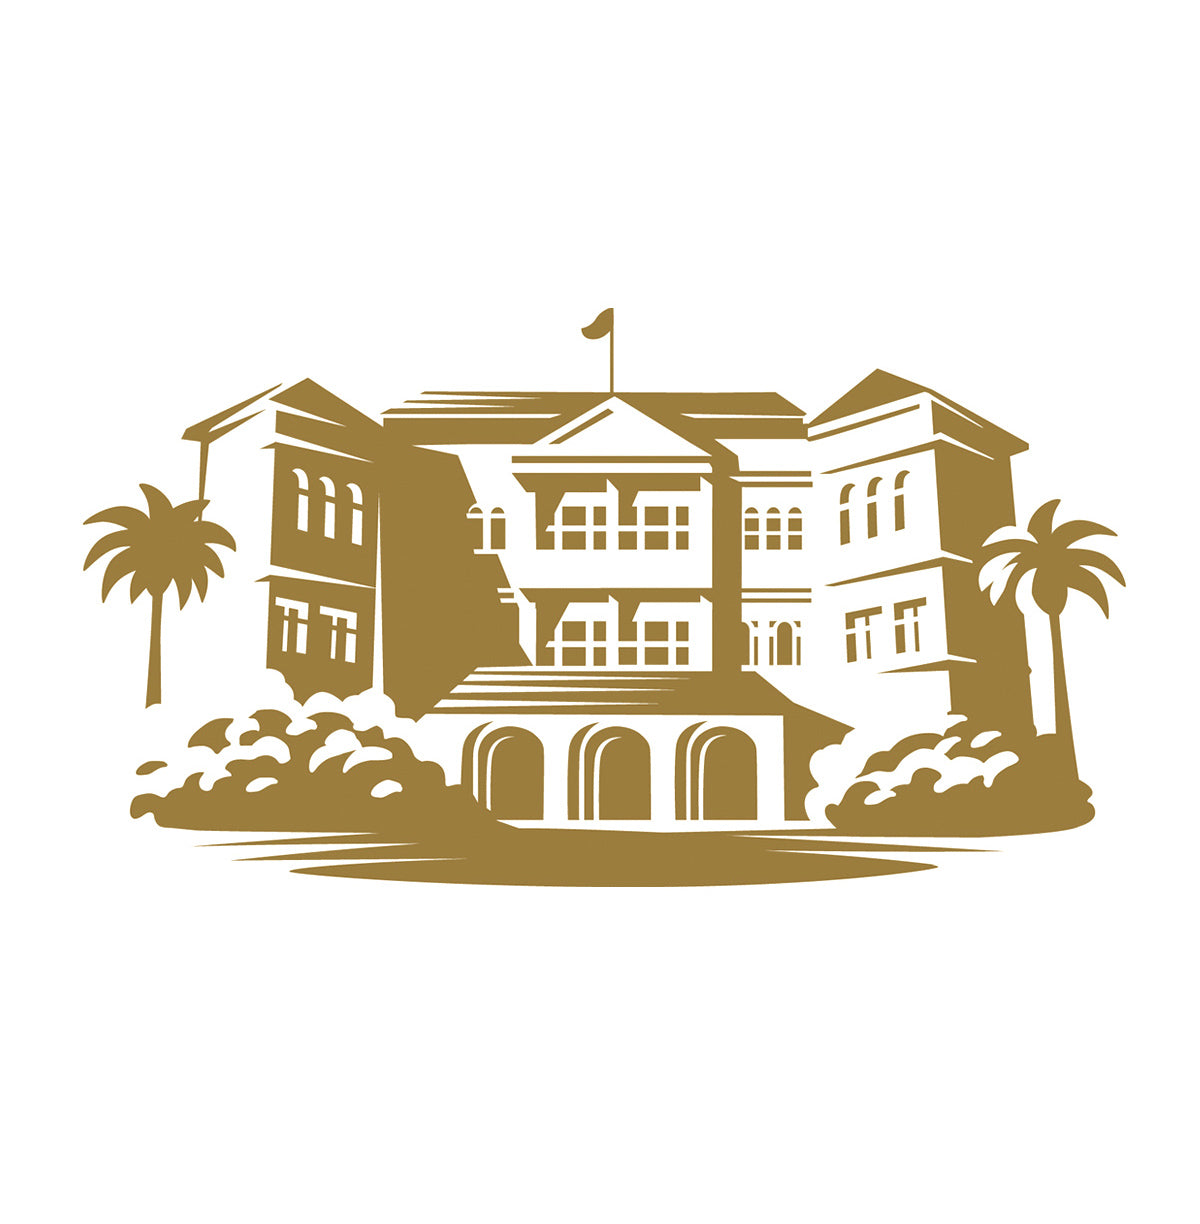 illustration icon line drawing of Raffles Hotel in Singapore, logo architectural